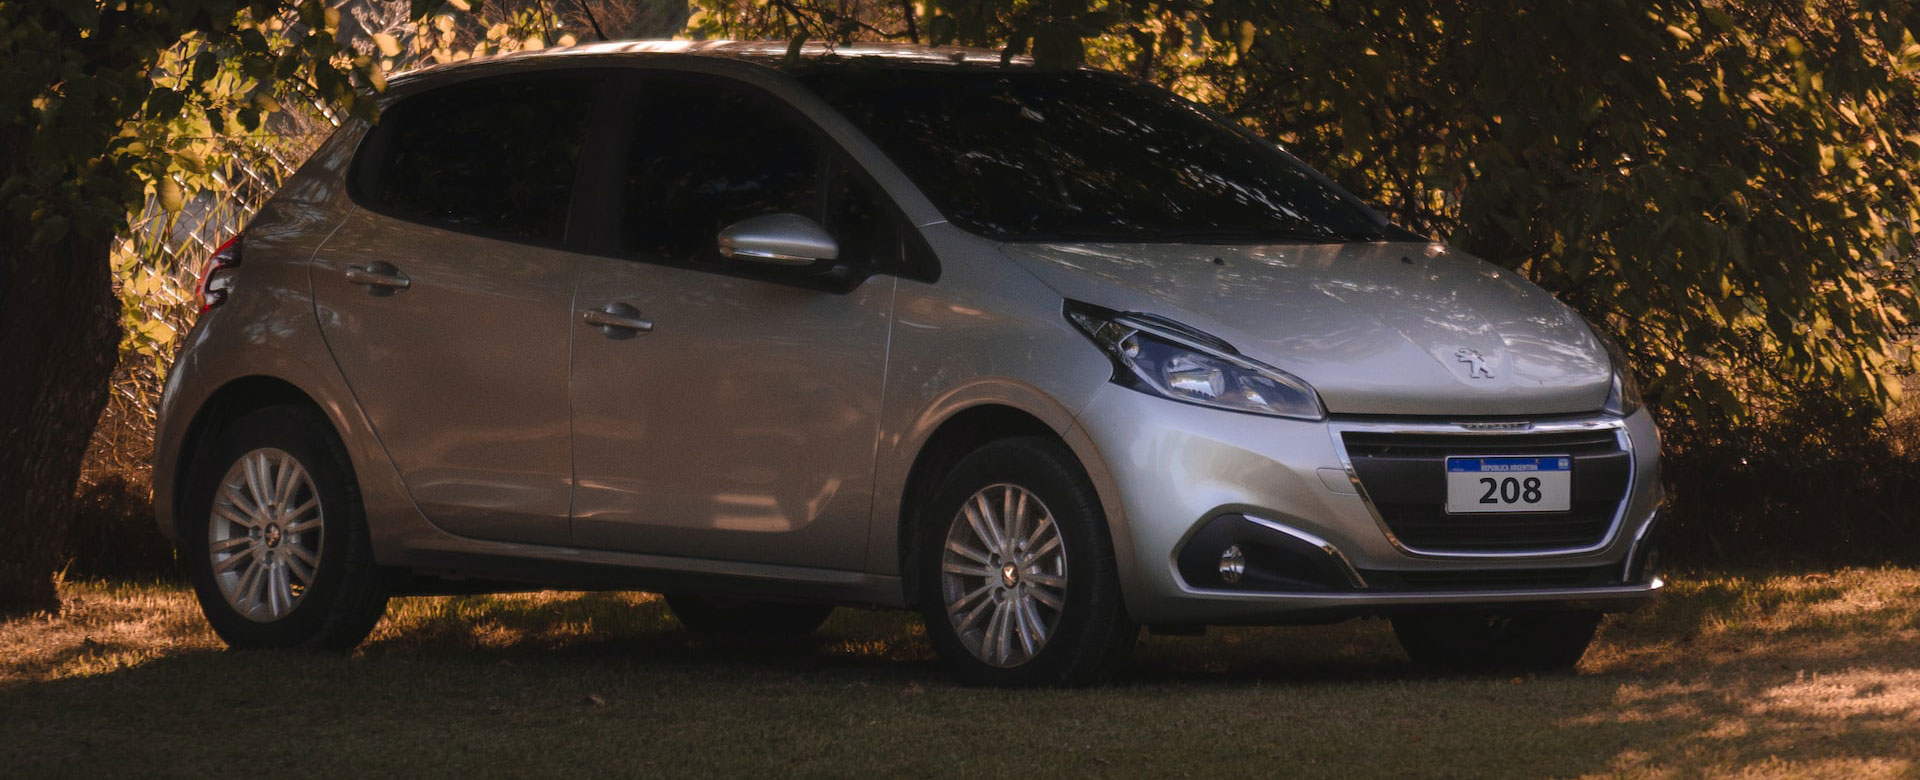 grey Peugeot under trees and shade